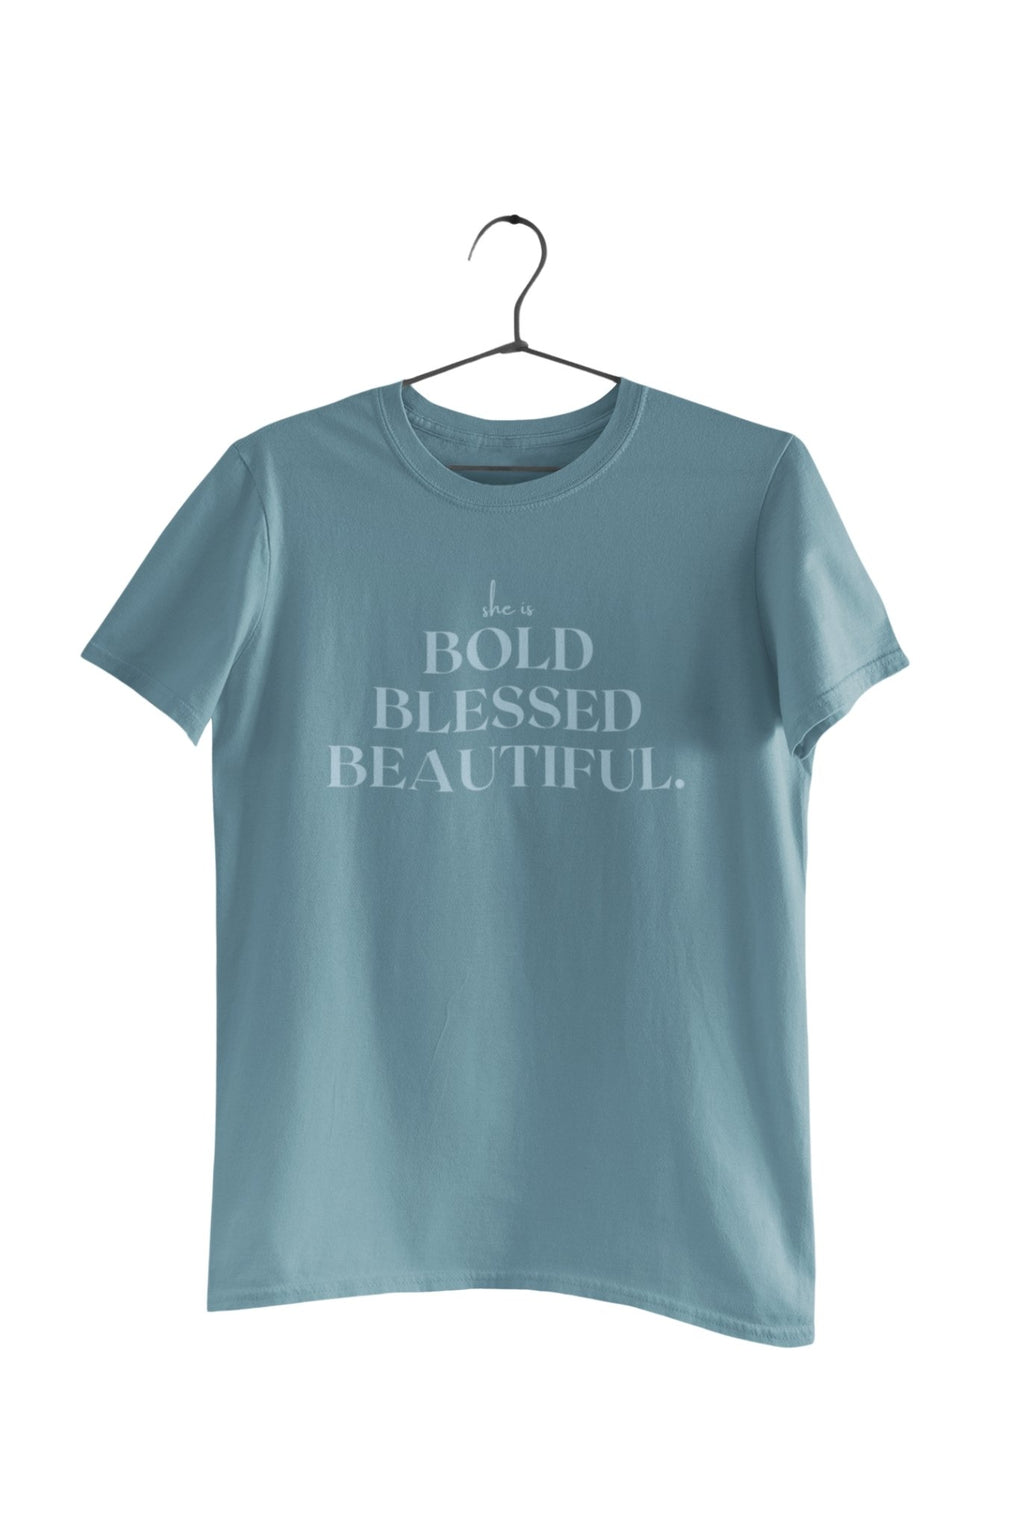 Bold Blessed Beautiful - A Meaningful Mood